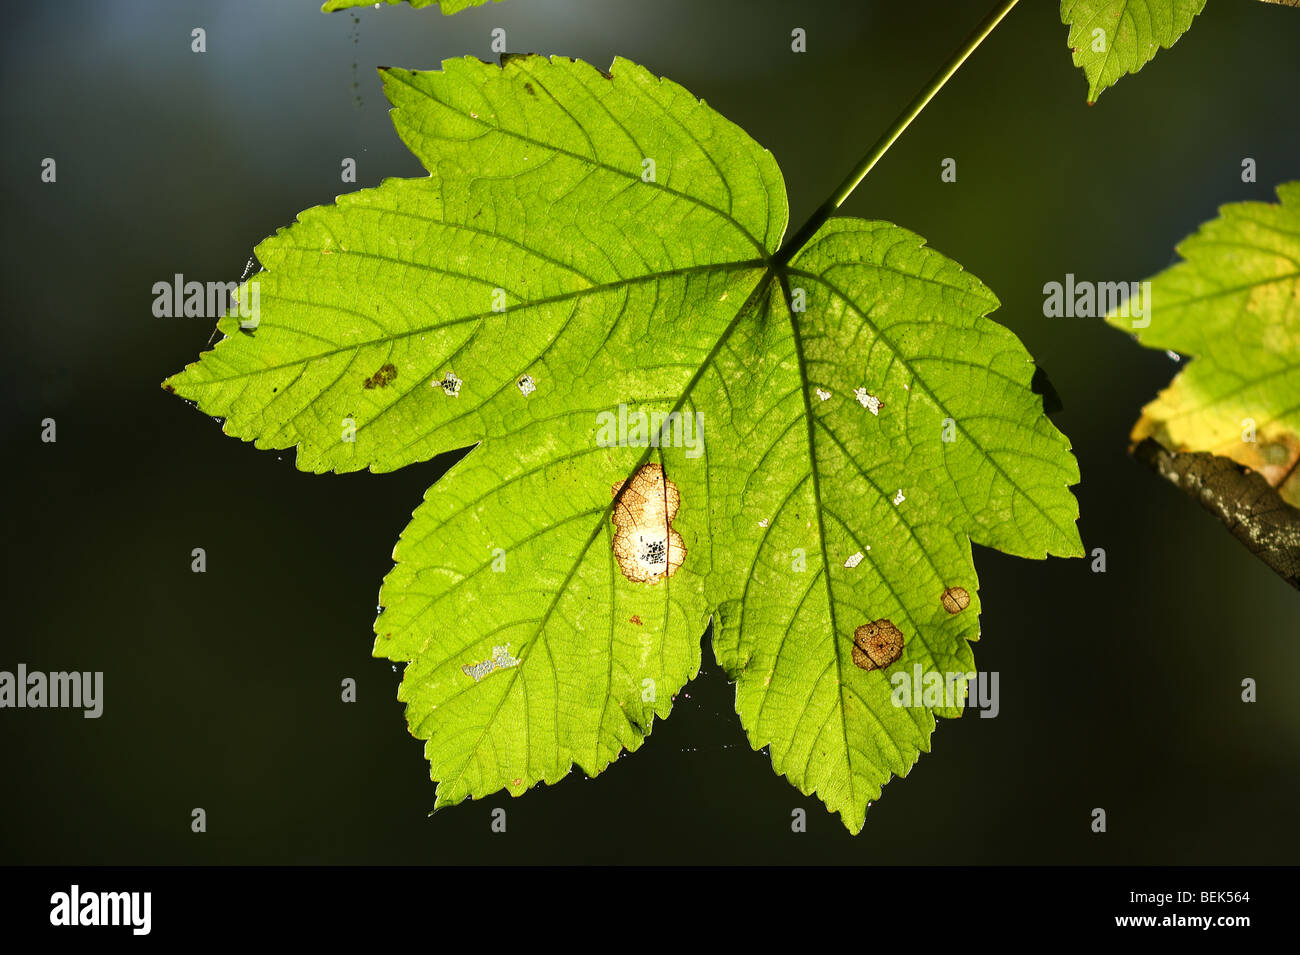 Leaf of Sycamore (Acer pseudoplatanus) in forest Stock Photo